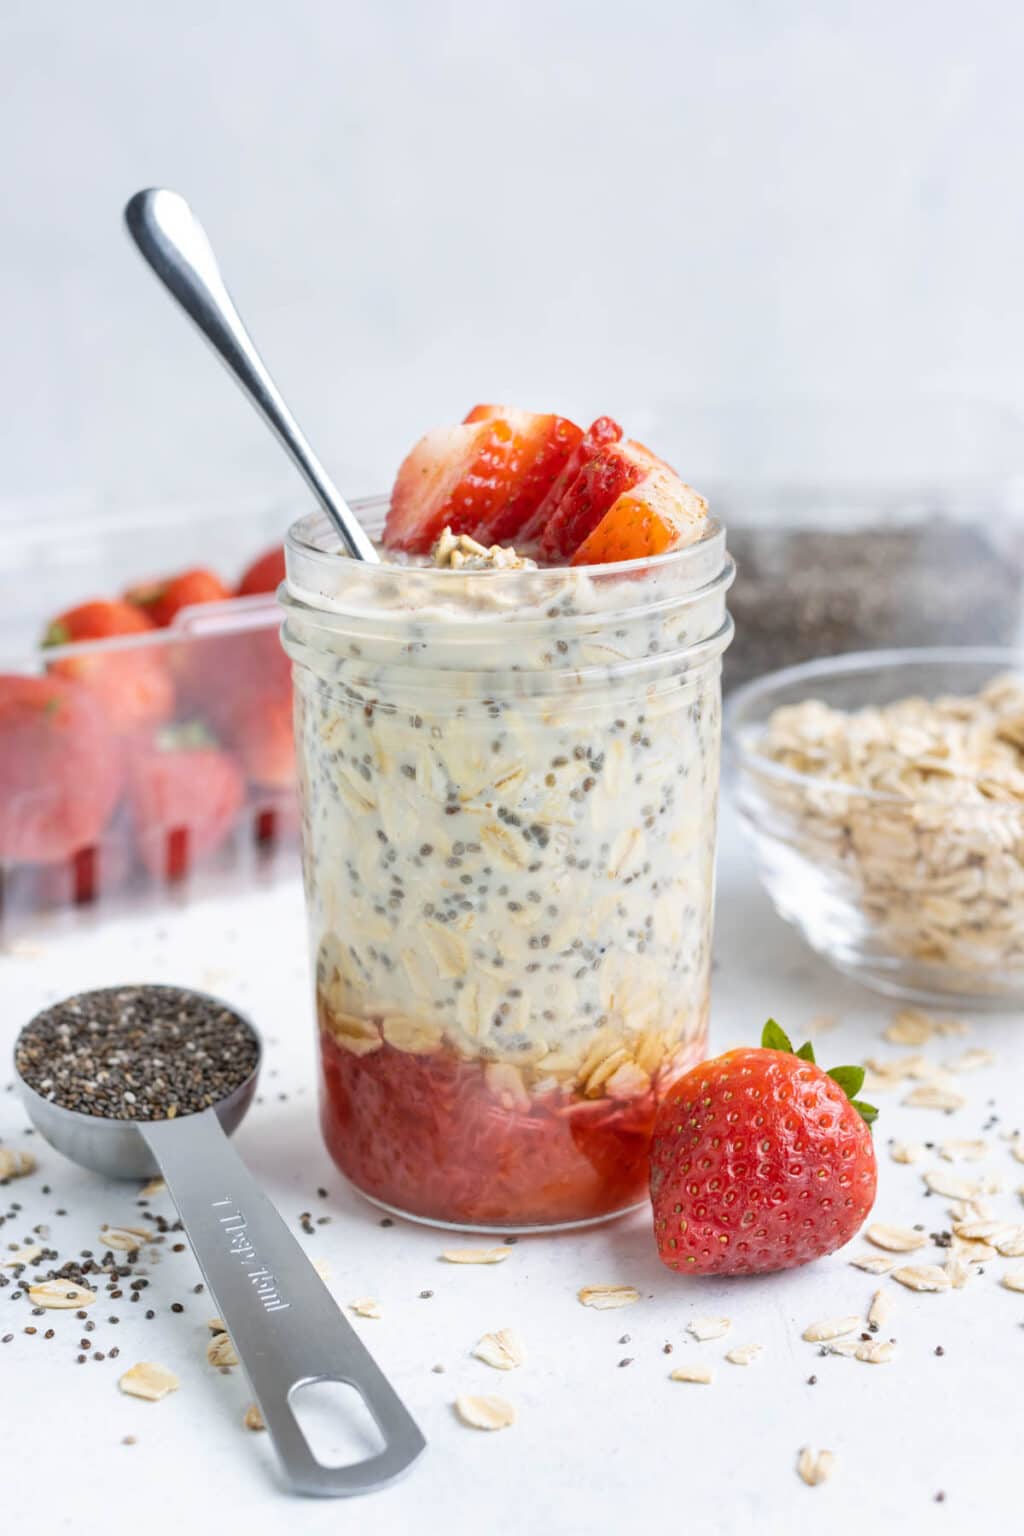 Strawberry Overnight Oats - Evolving Table